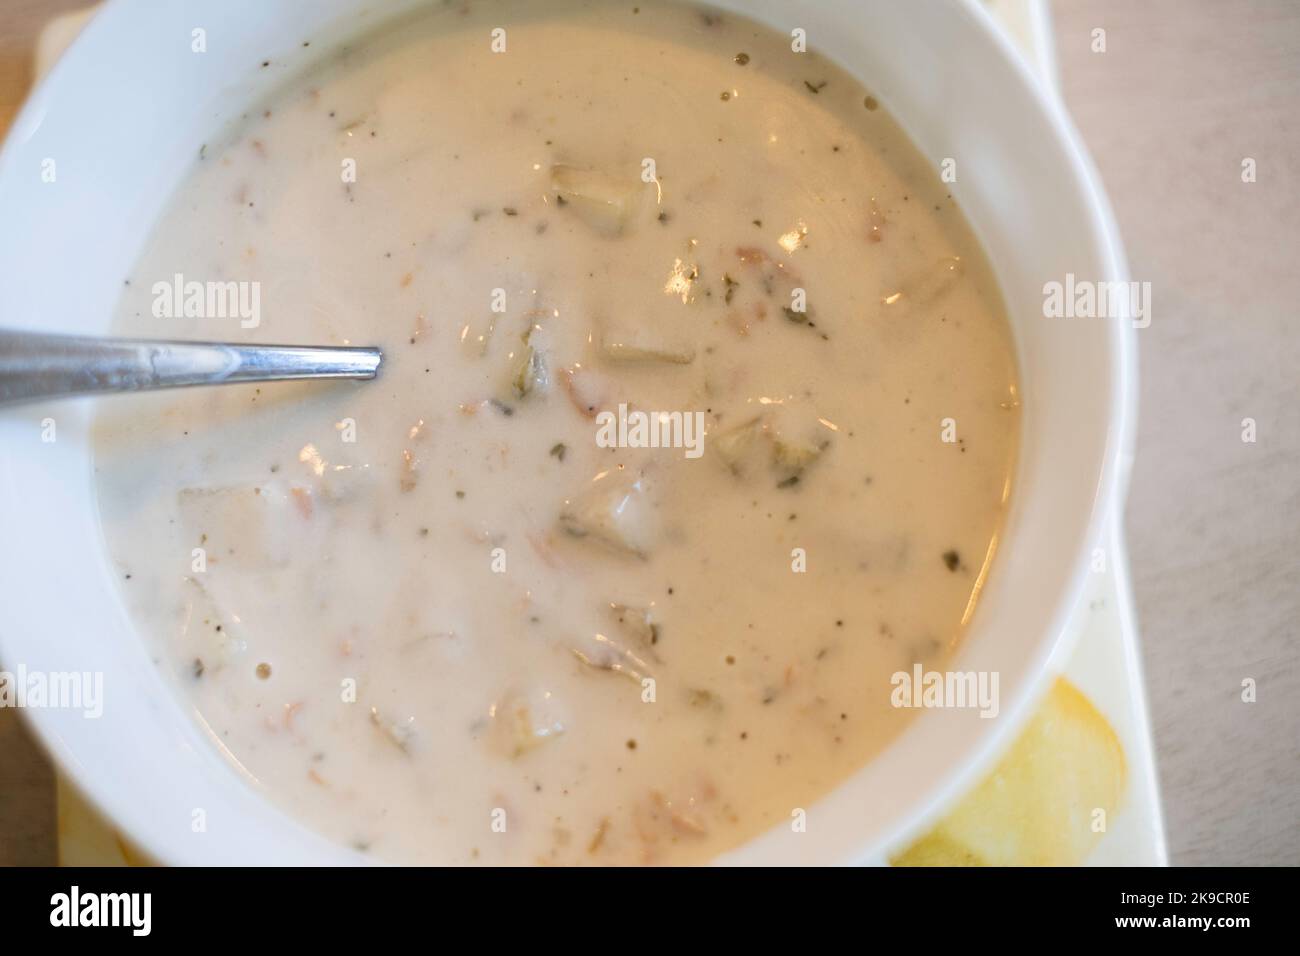 Clam chowder closeup in a white bowl with a spoon. USA Stock Photo